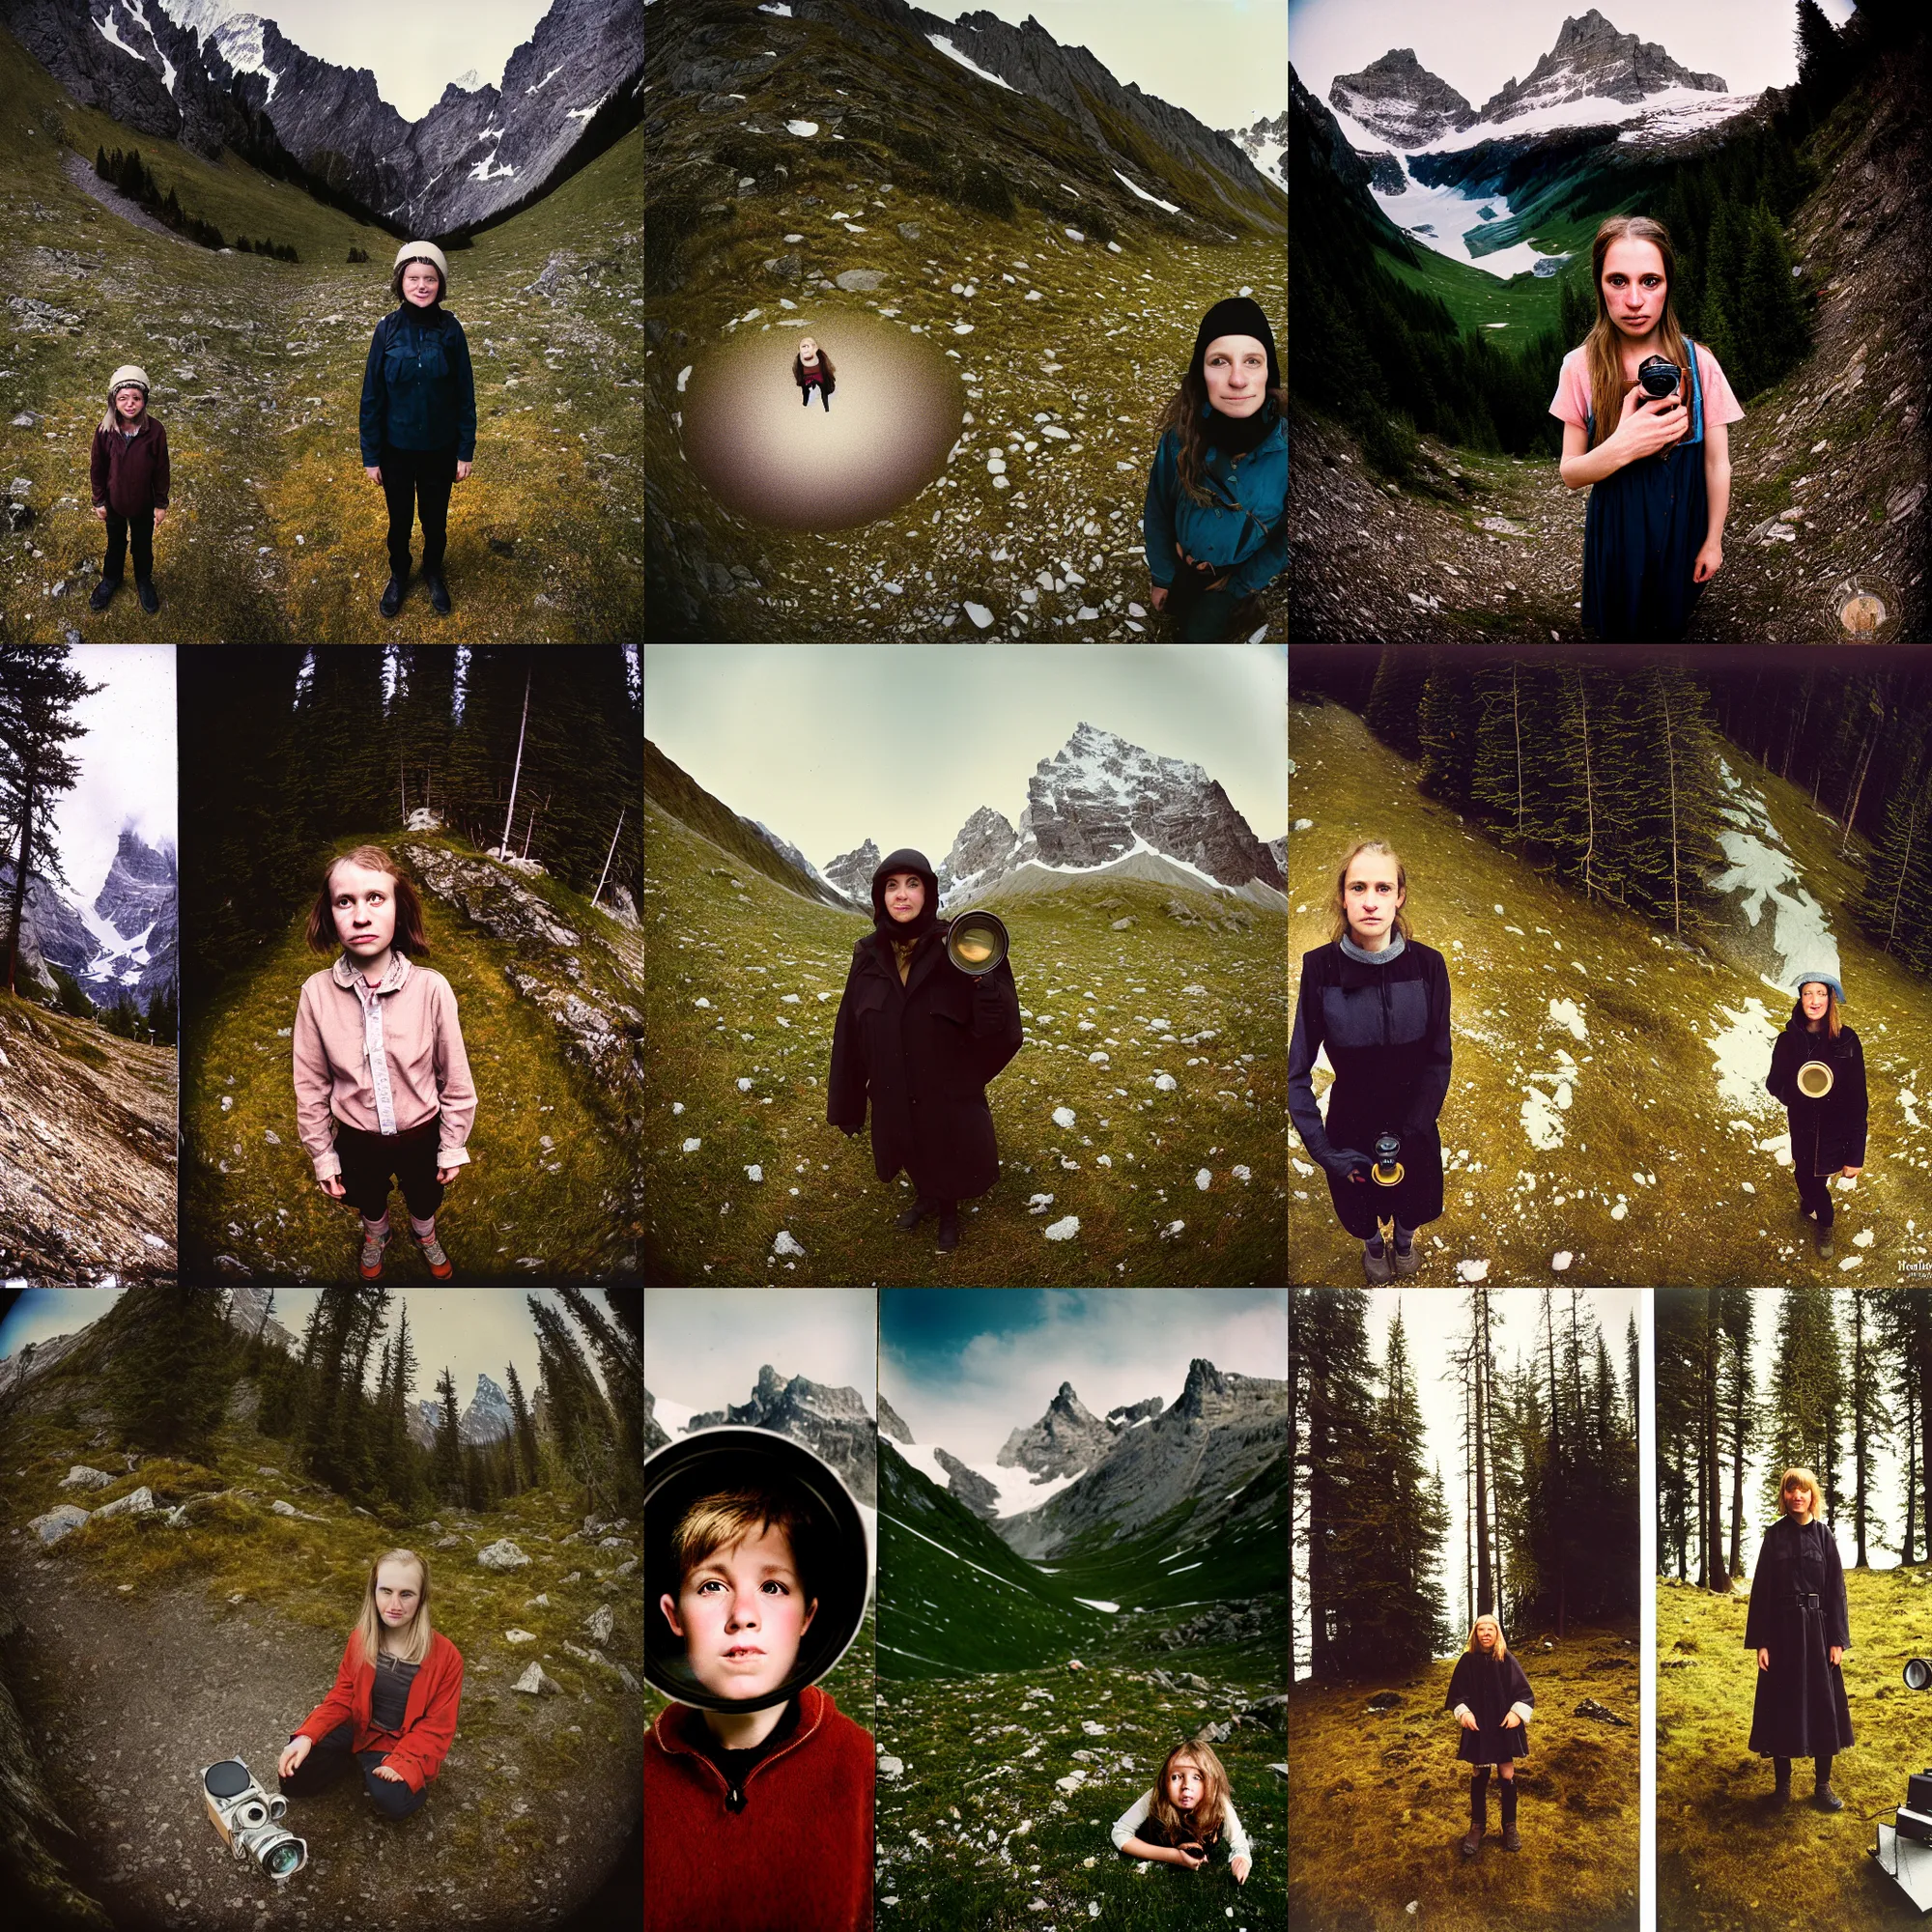 Prompt: kodak portra 4 0 0, wetplate, flashlight, 8 mm extreme fisheye, award - winning portrait by britt marling of heidi meets almohi for the first time at mountain meadow in swiss alps, muted colours